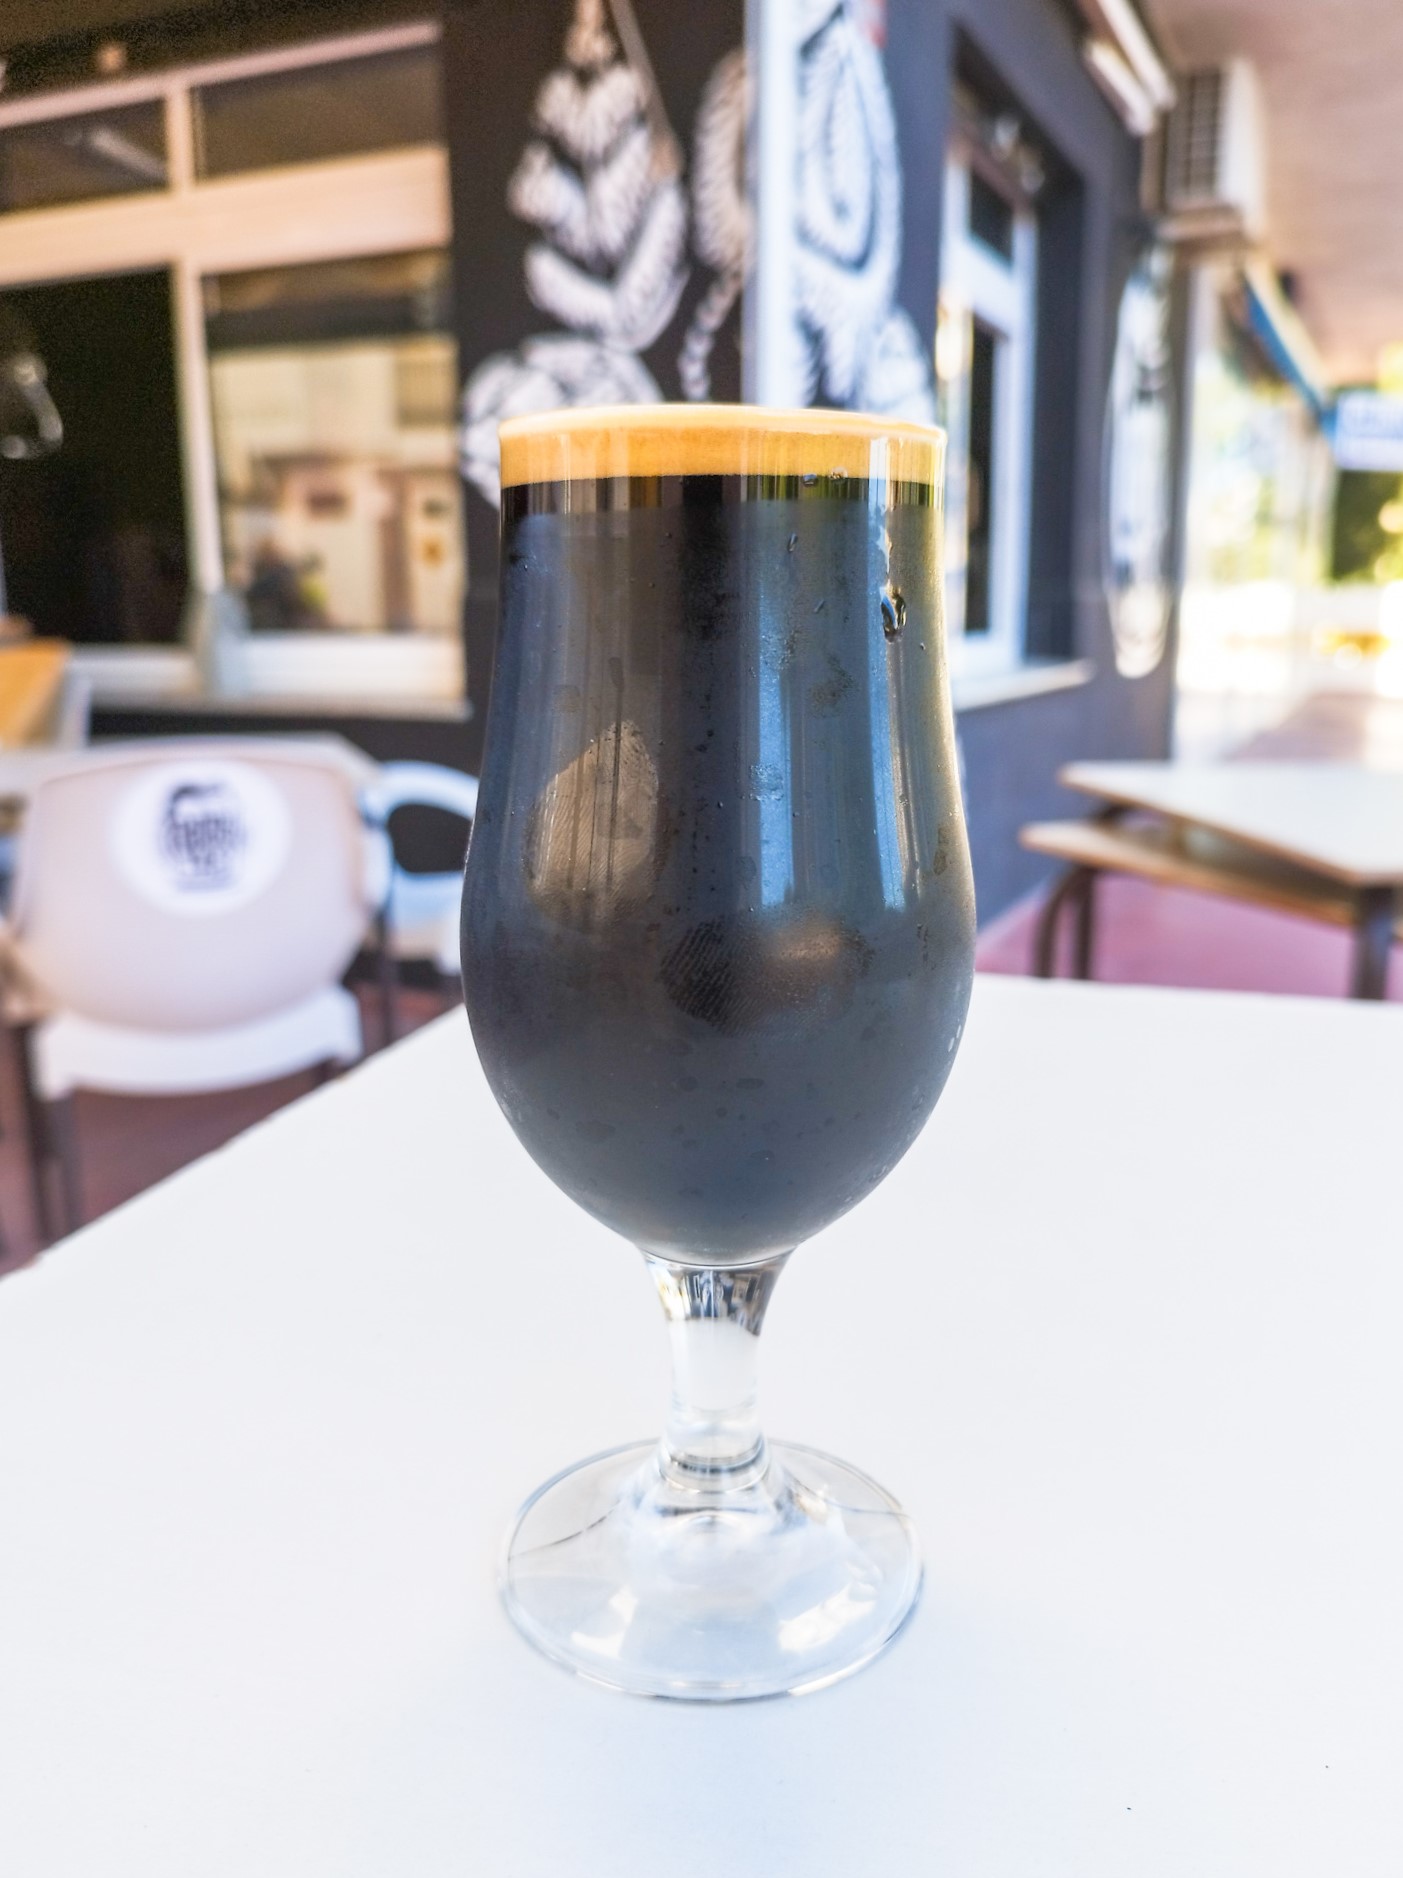 Aupa Towarisch Imperial Stout | Craft Beer in the Basque Country: Laugar Brewery | Craft Beer Nomads